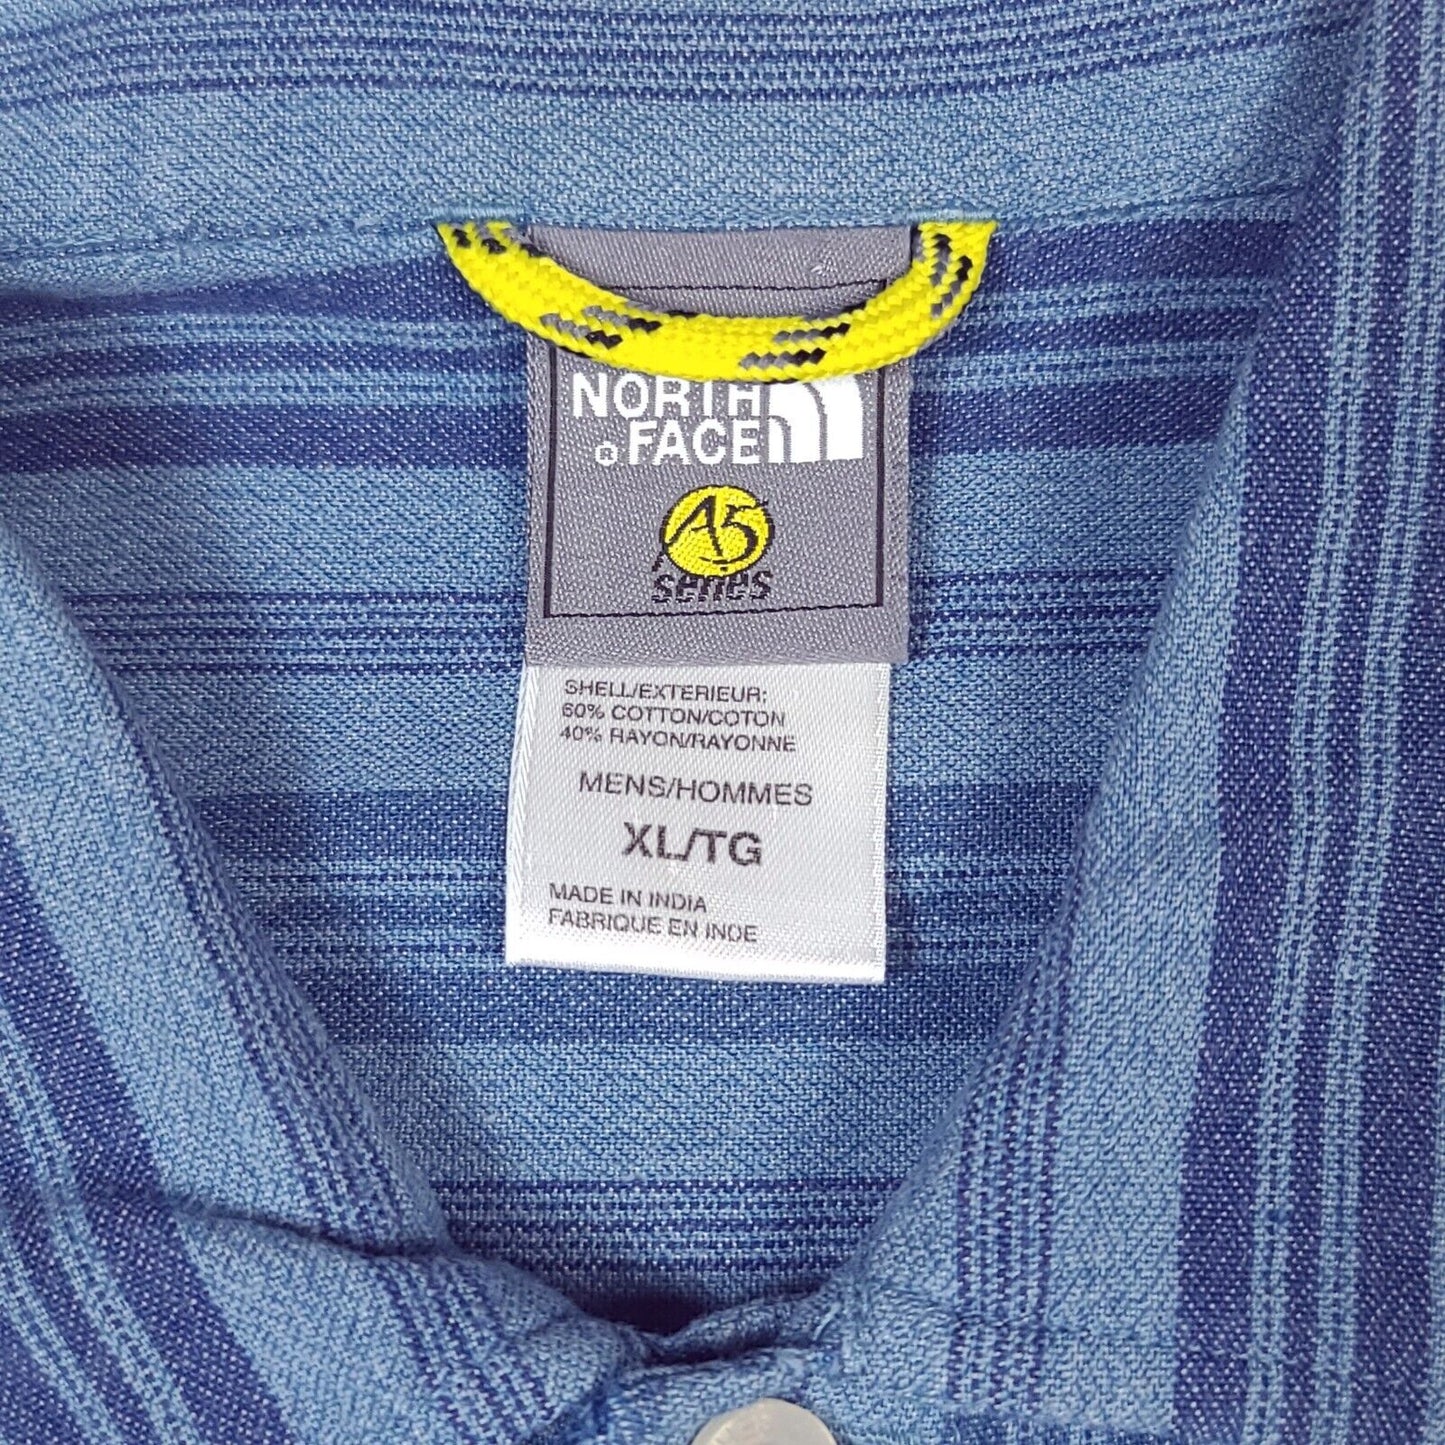 The North Face A5 Blue Striped Button Up Short Sleeve Shirt